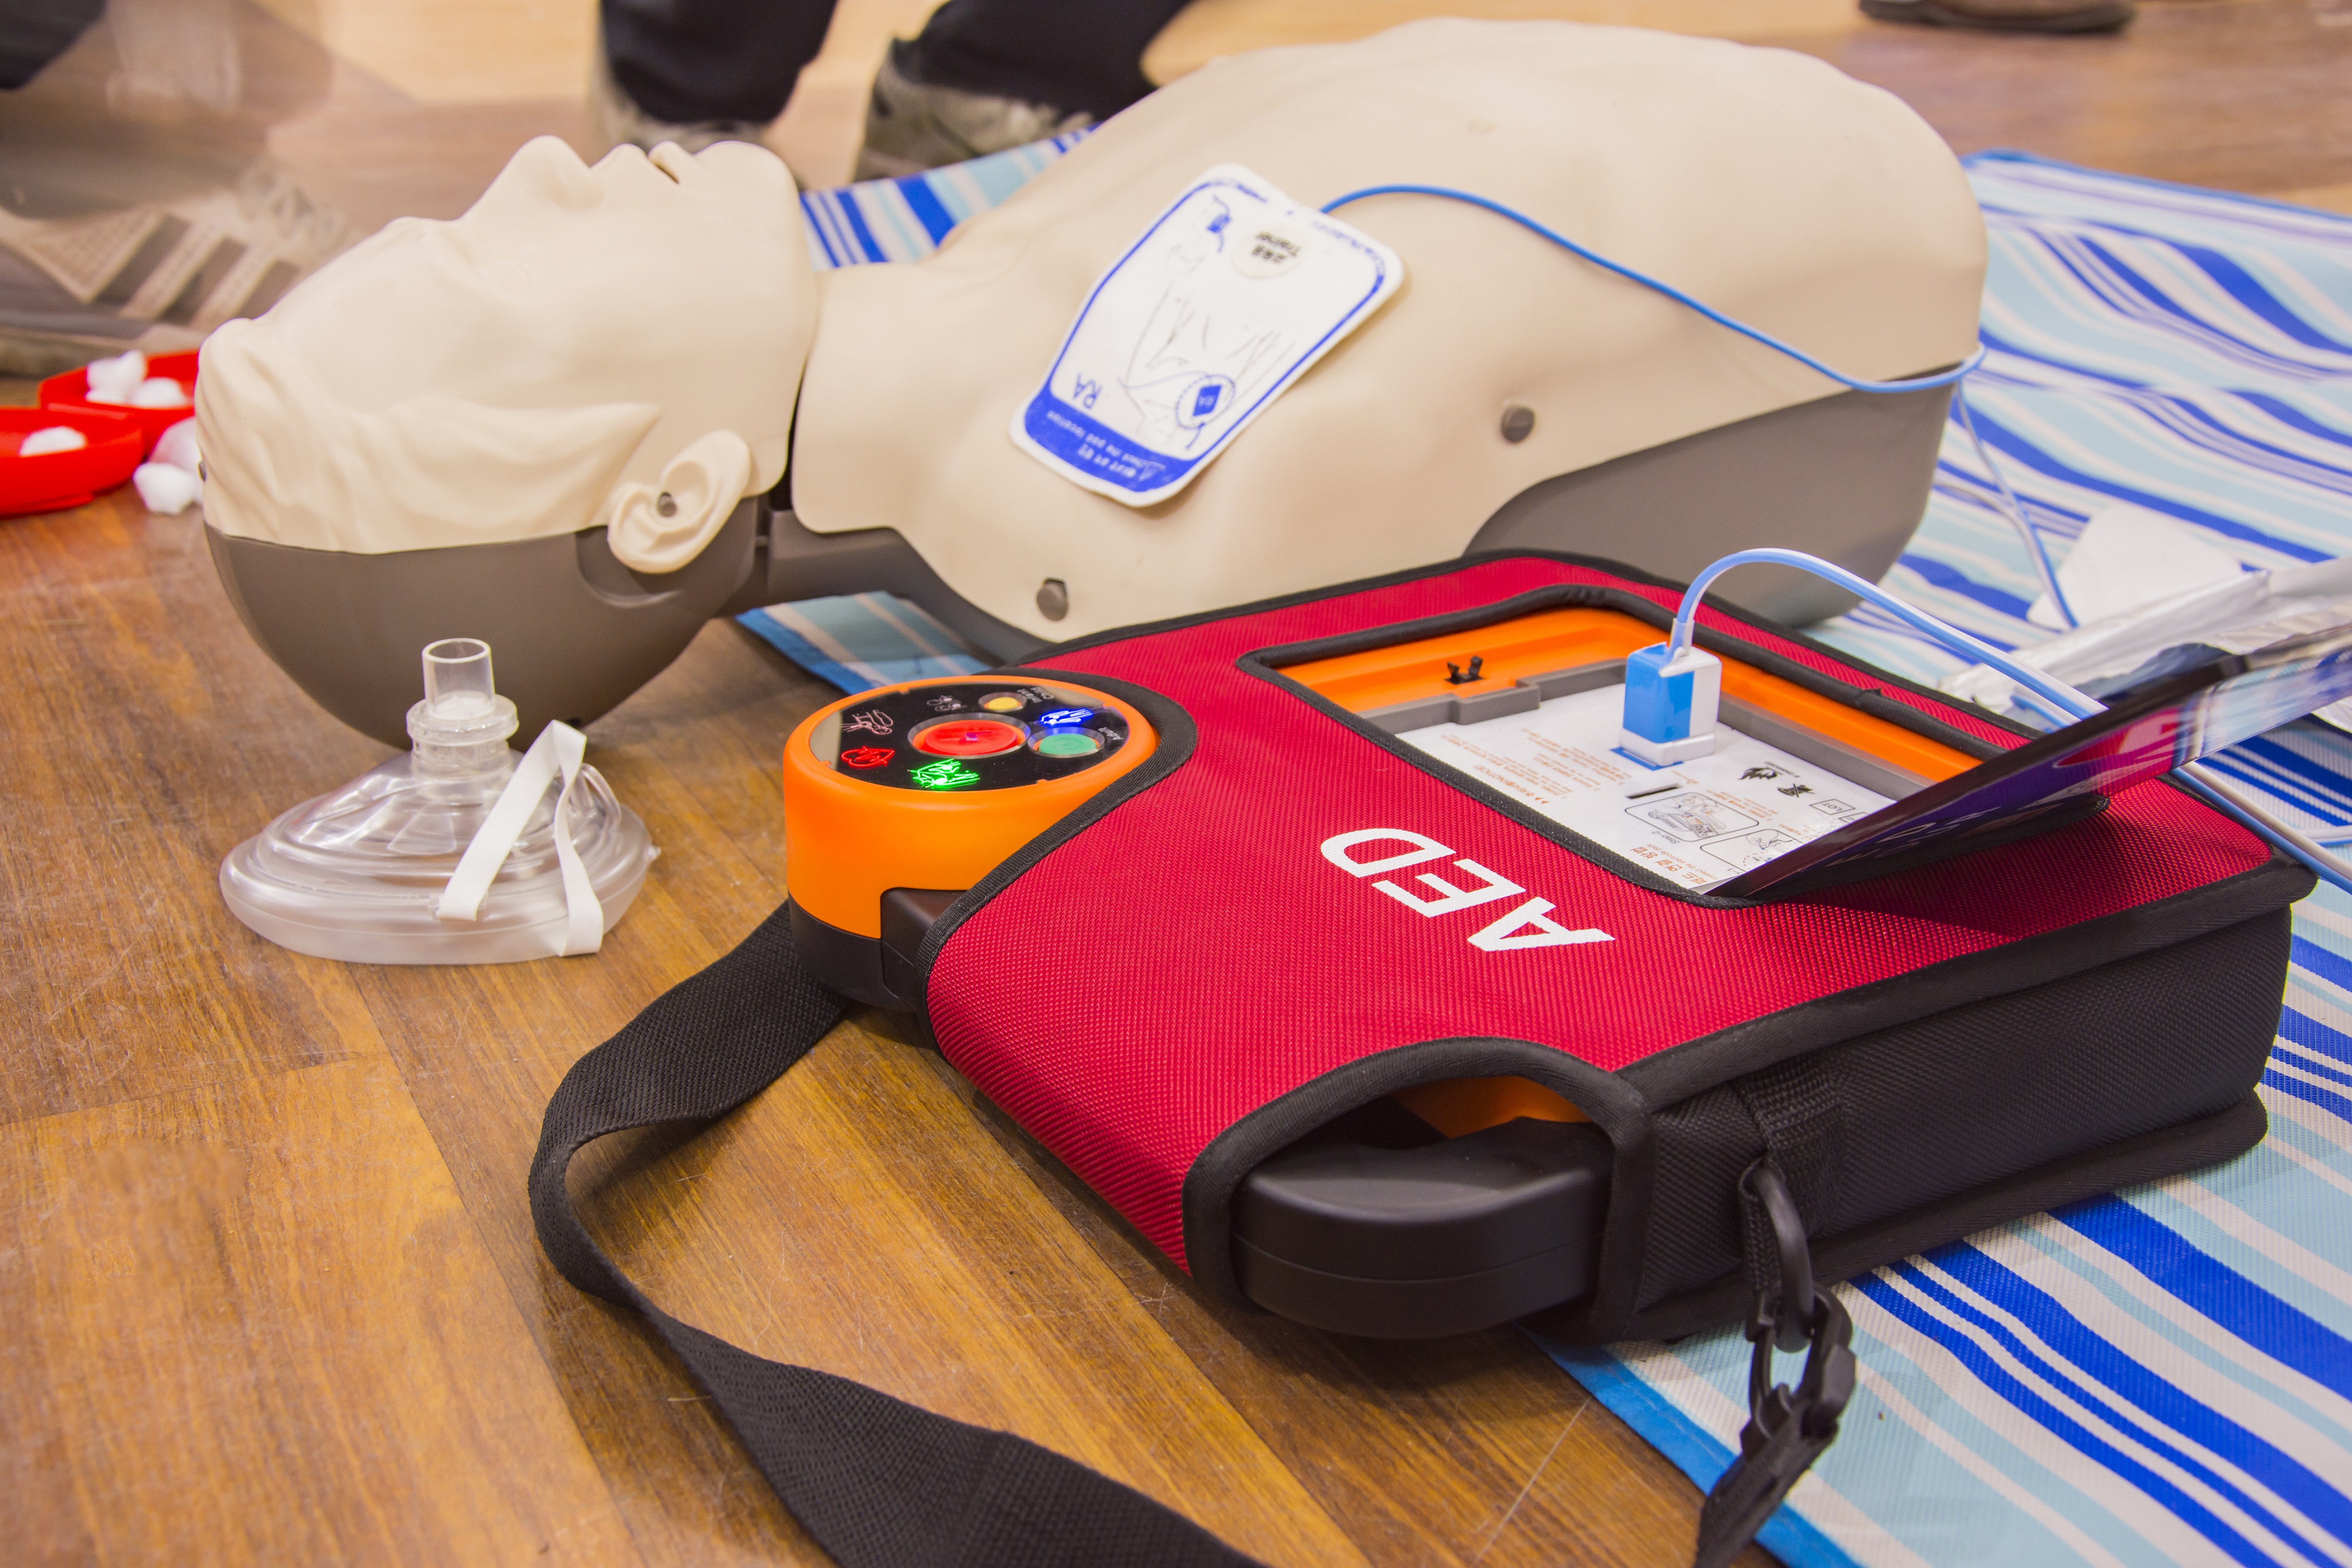 CPR AED First Aid Training Class July 30, 2022 in Tigard